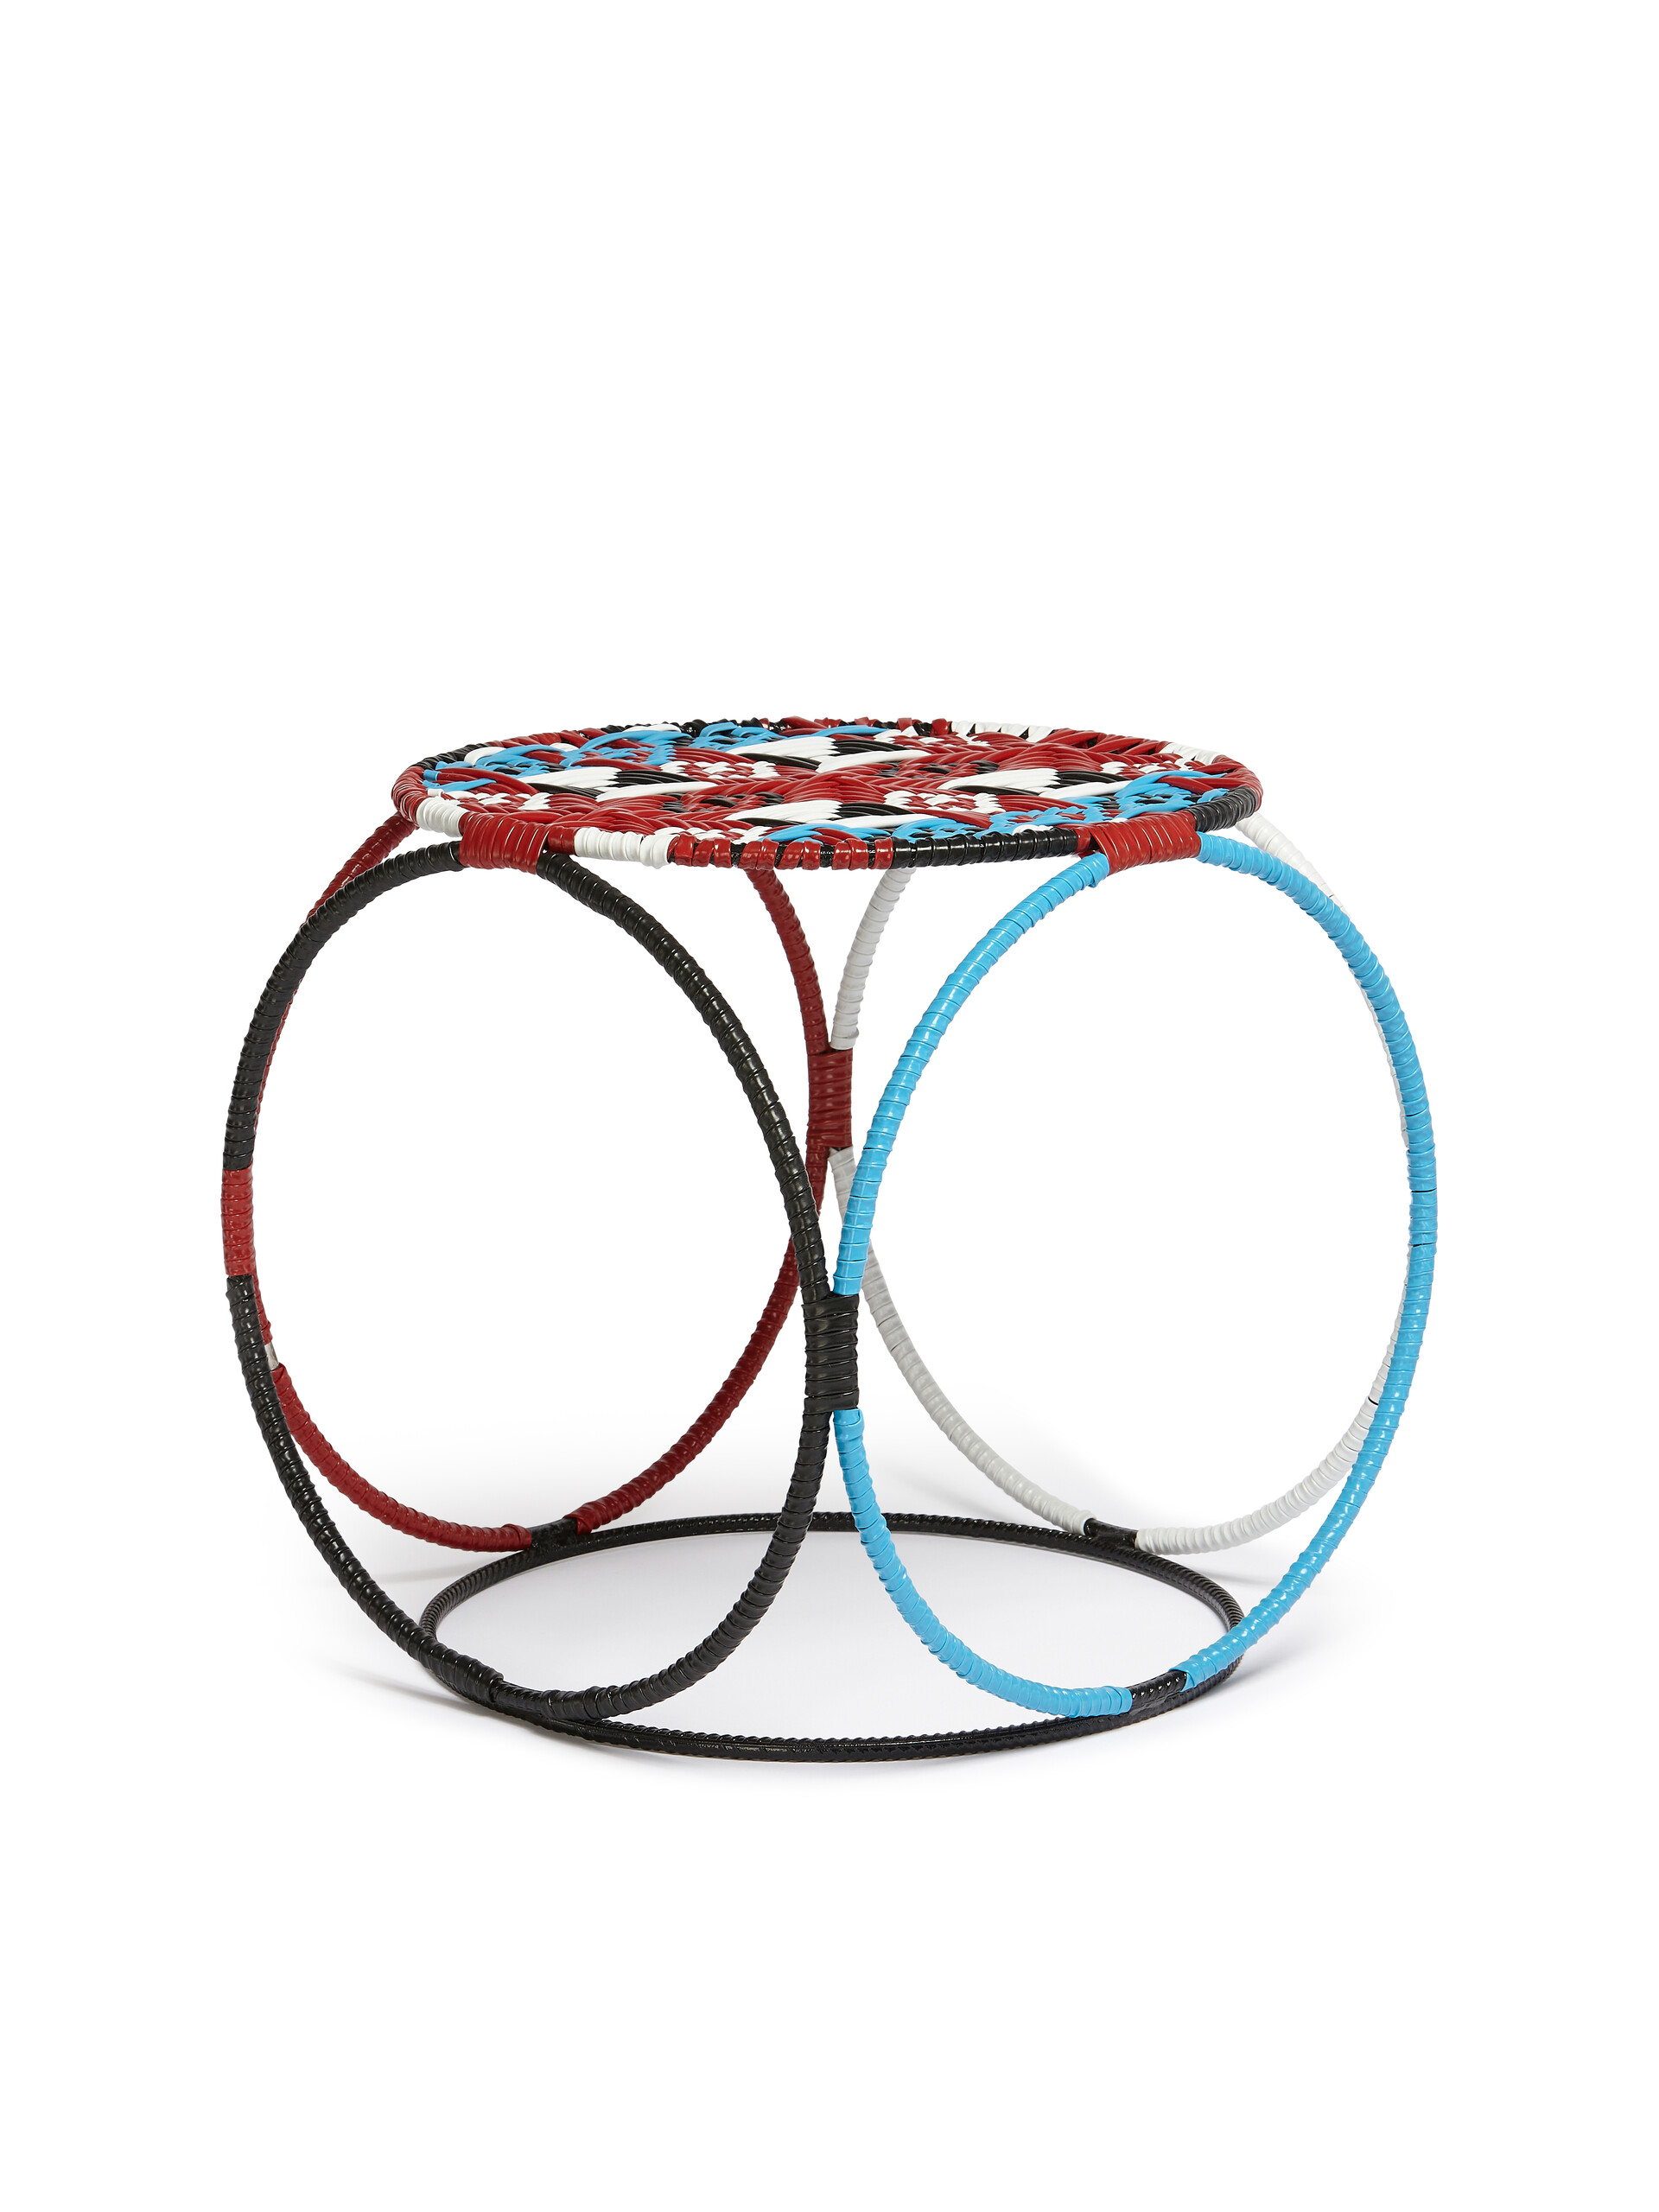 MARNI MARKET multicolor red and blue stool-table - Furniture - Image 2